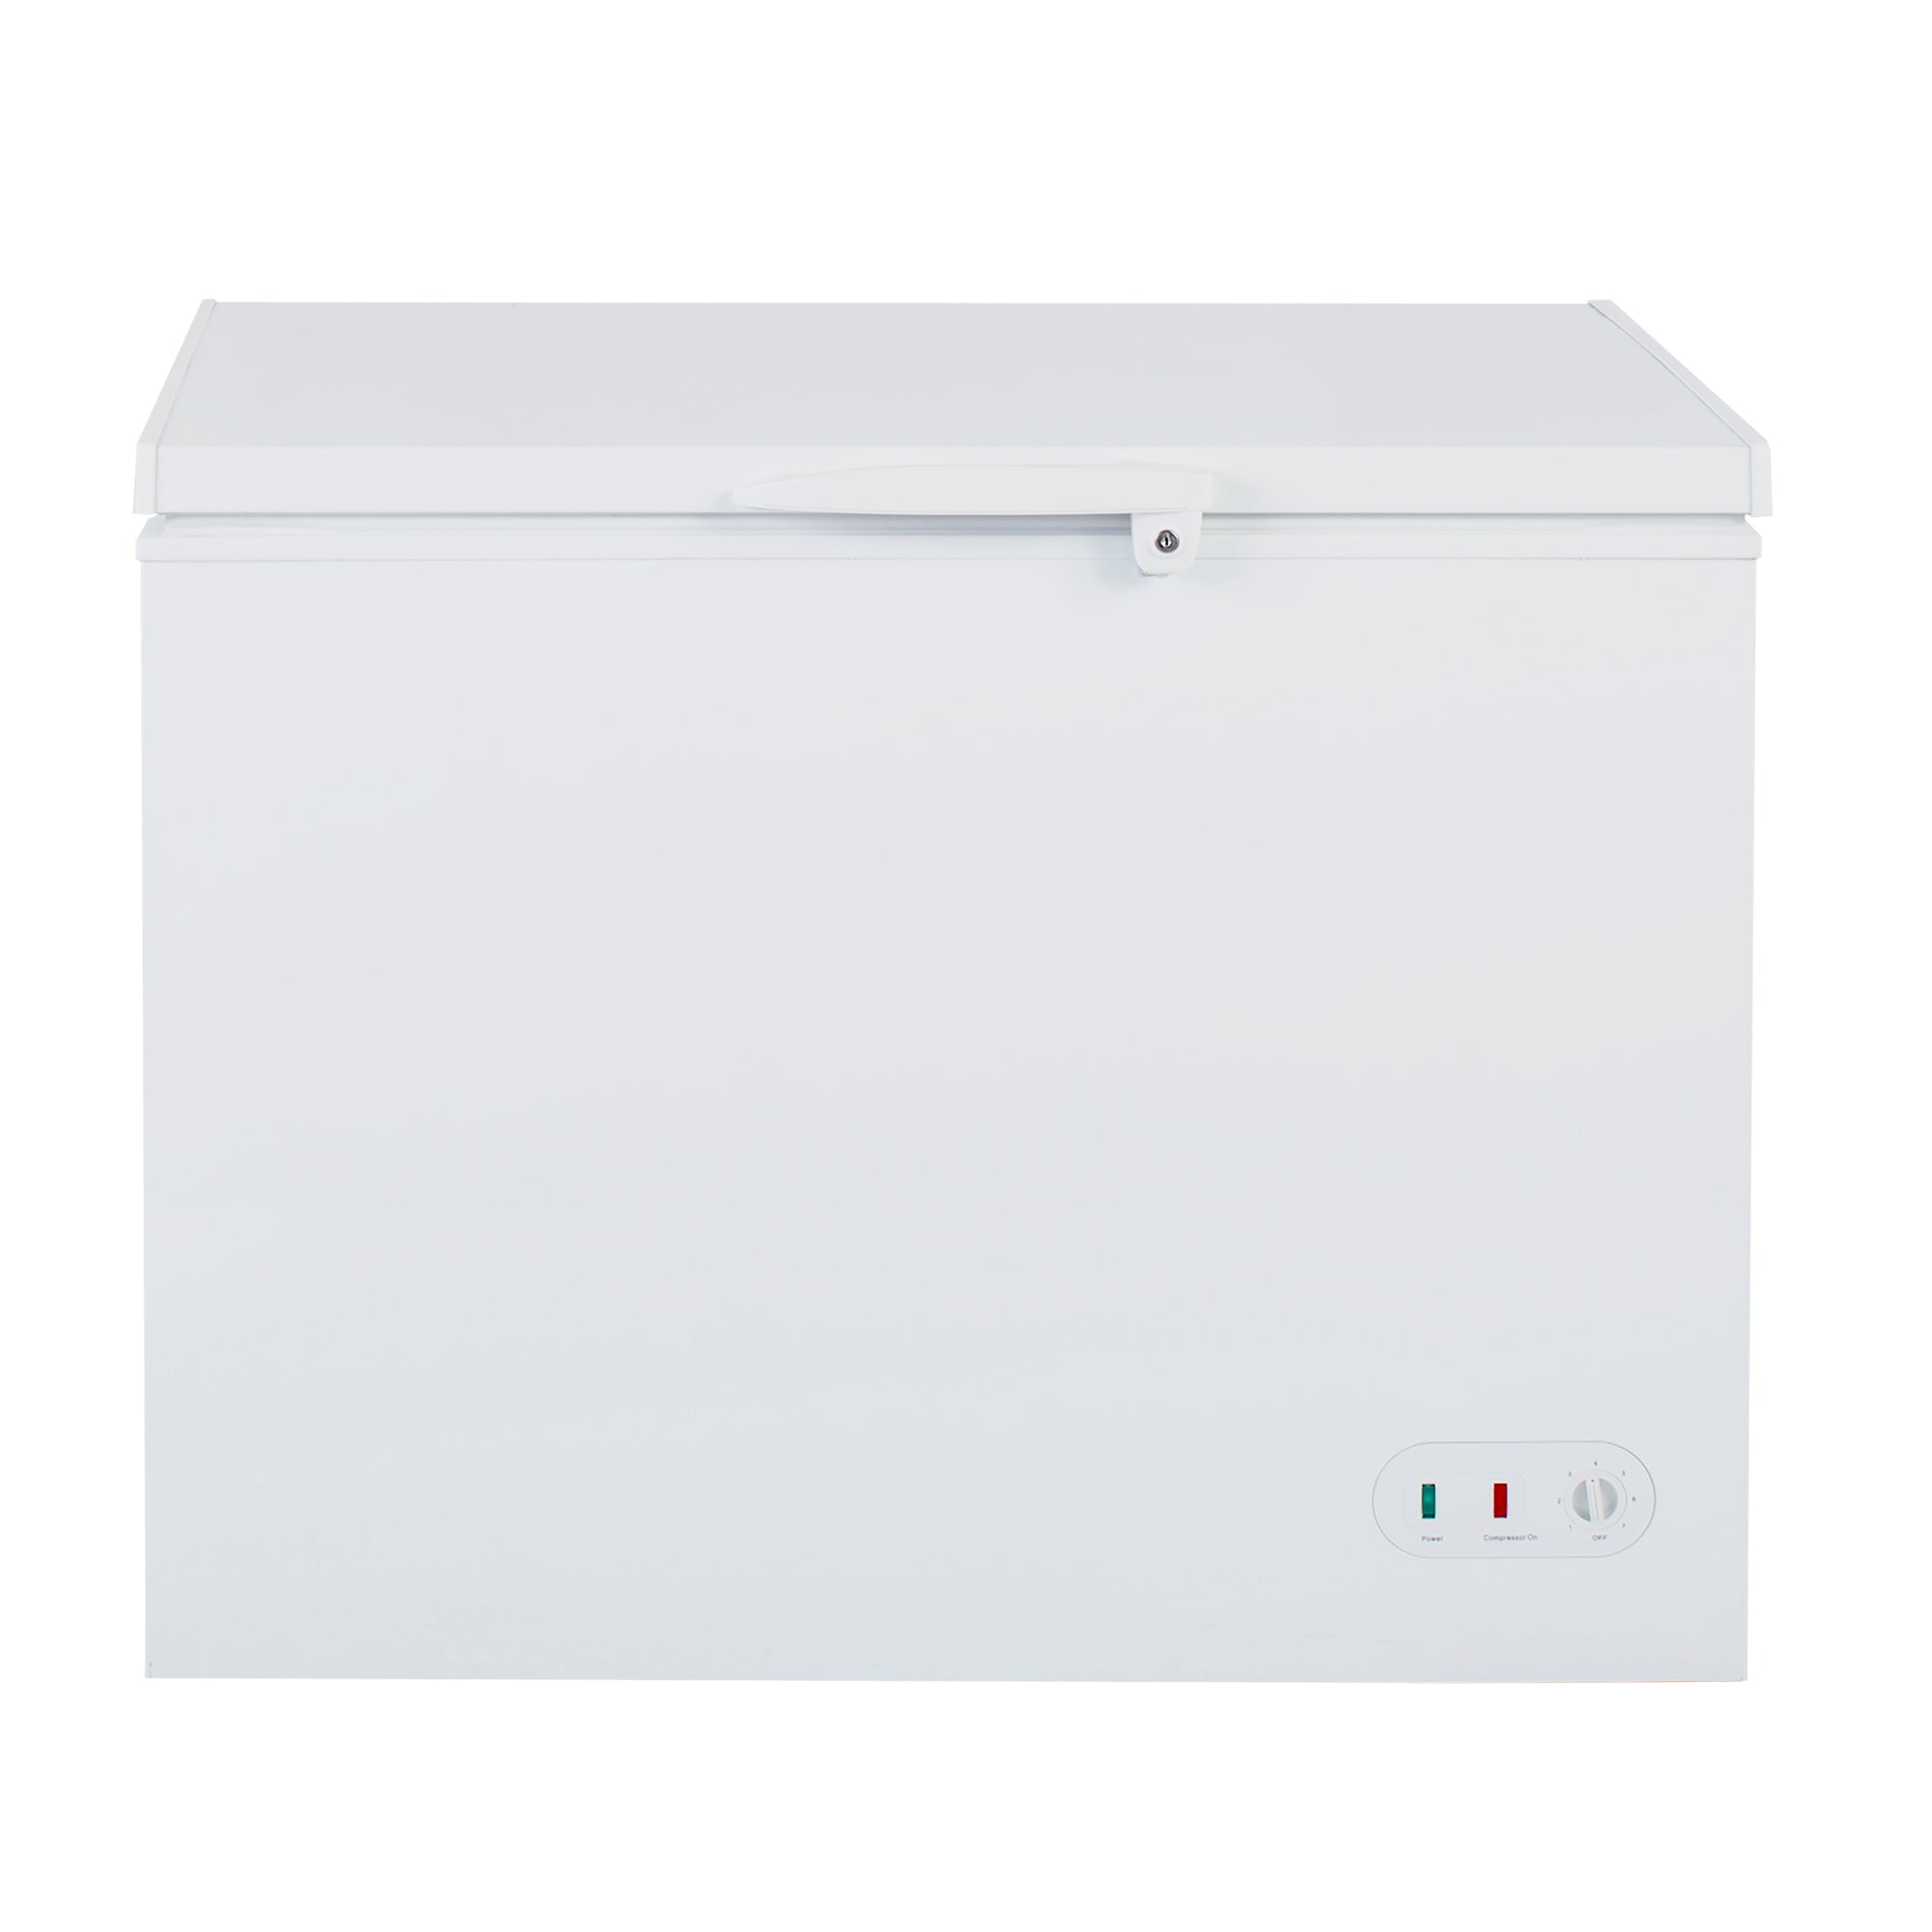 Maxx Cold Compact Chest Freezer with Solid Top, 37.8W, 7 cu. ft